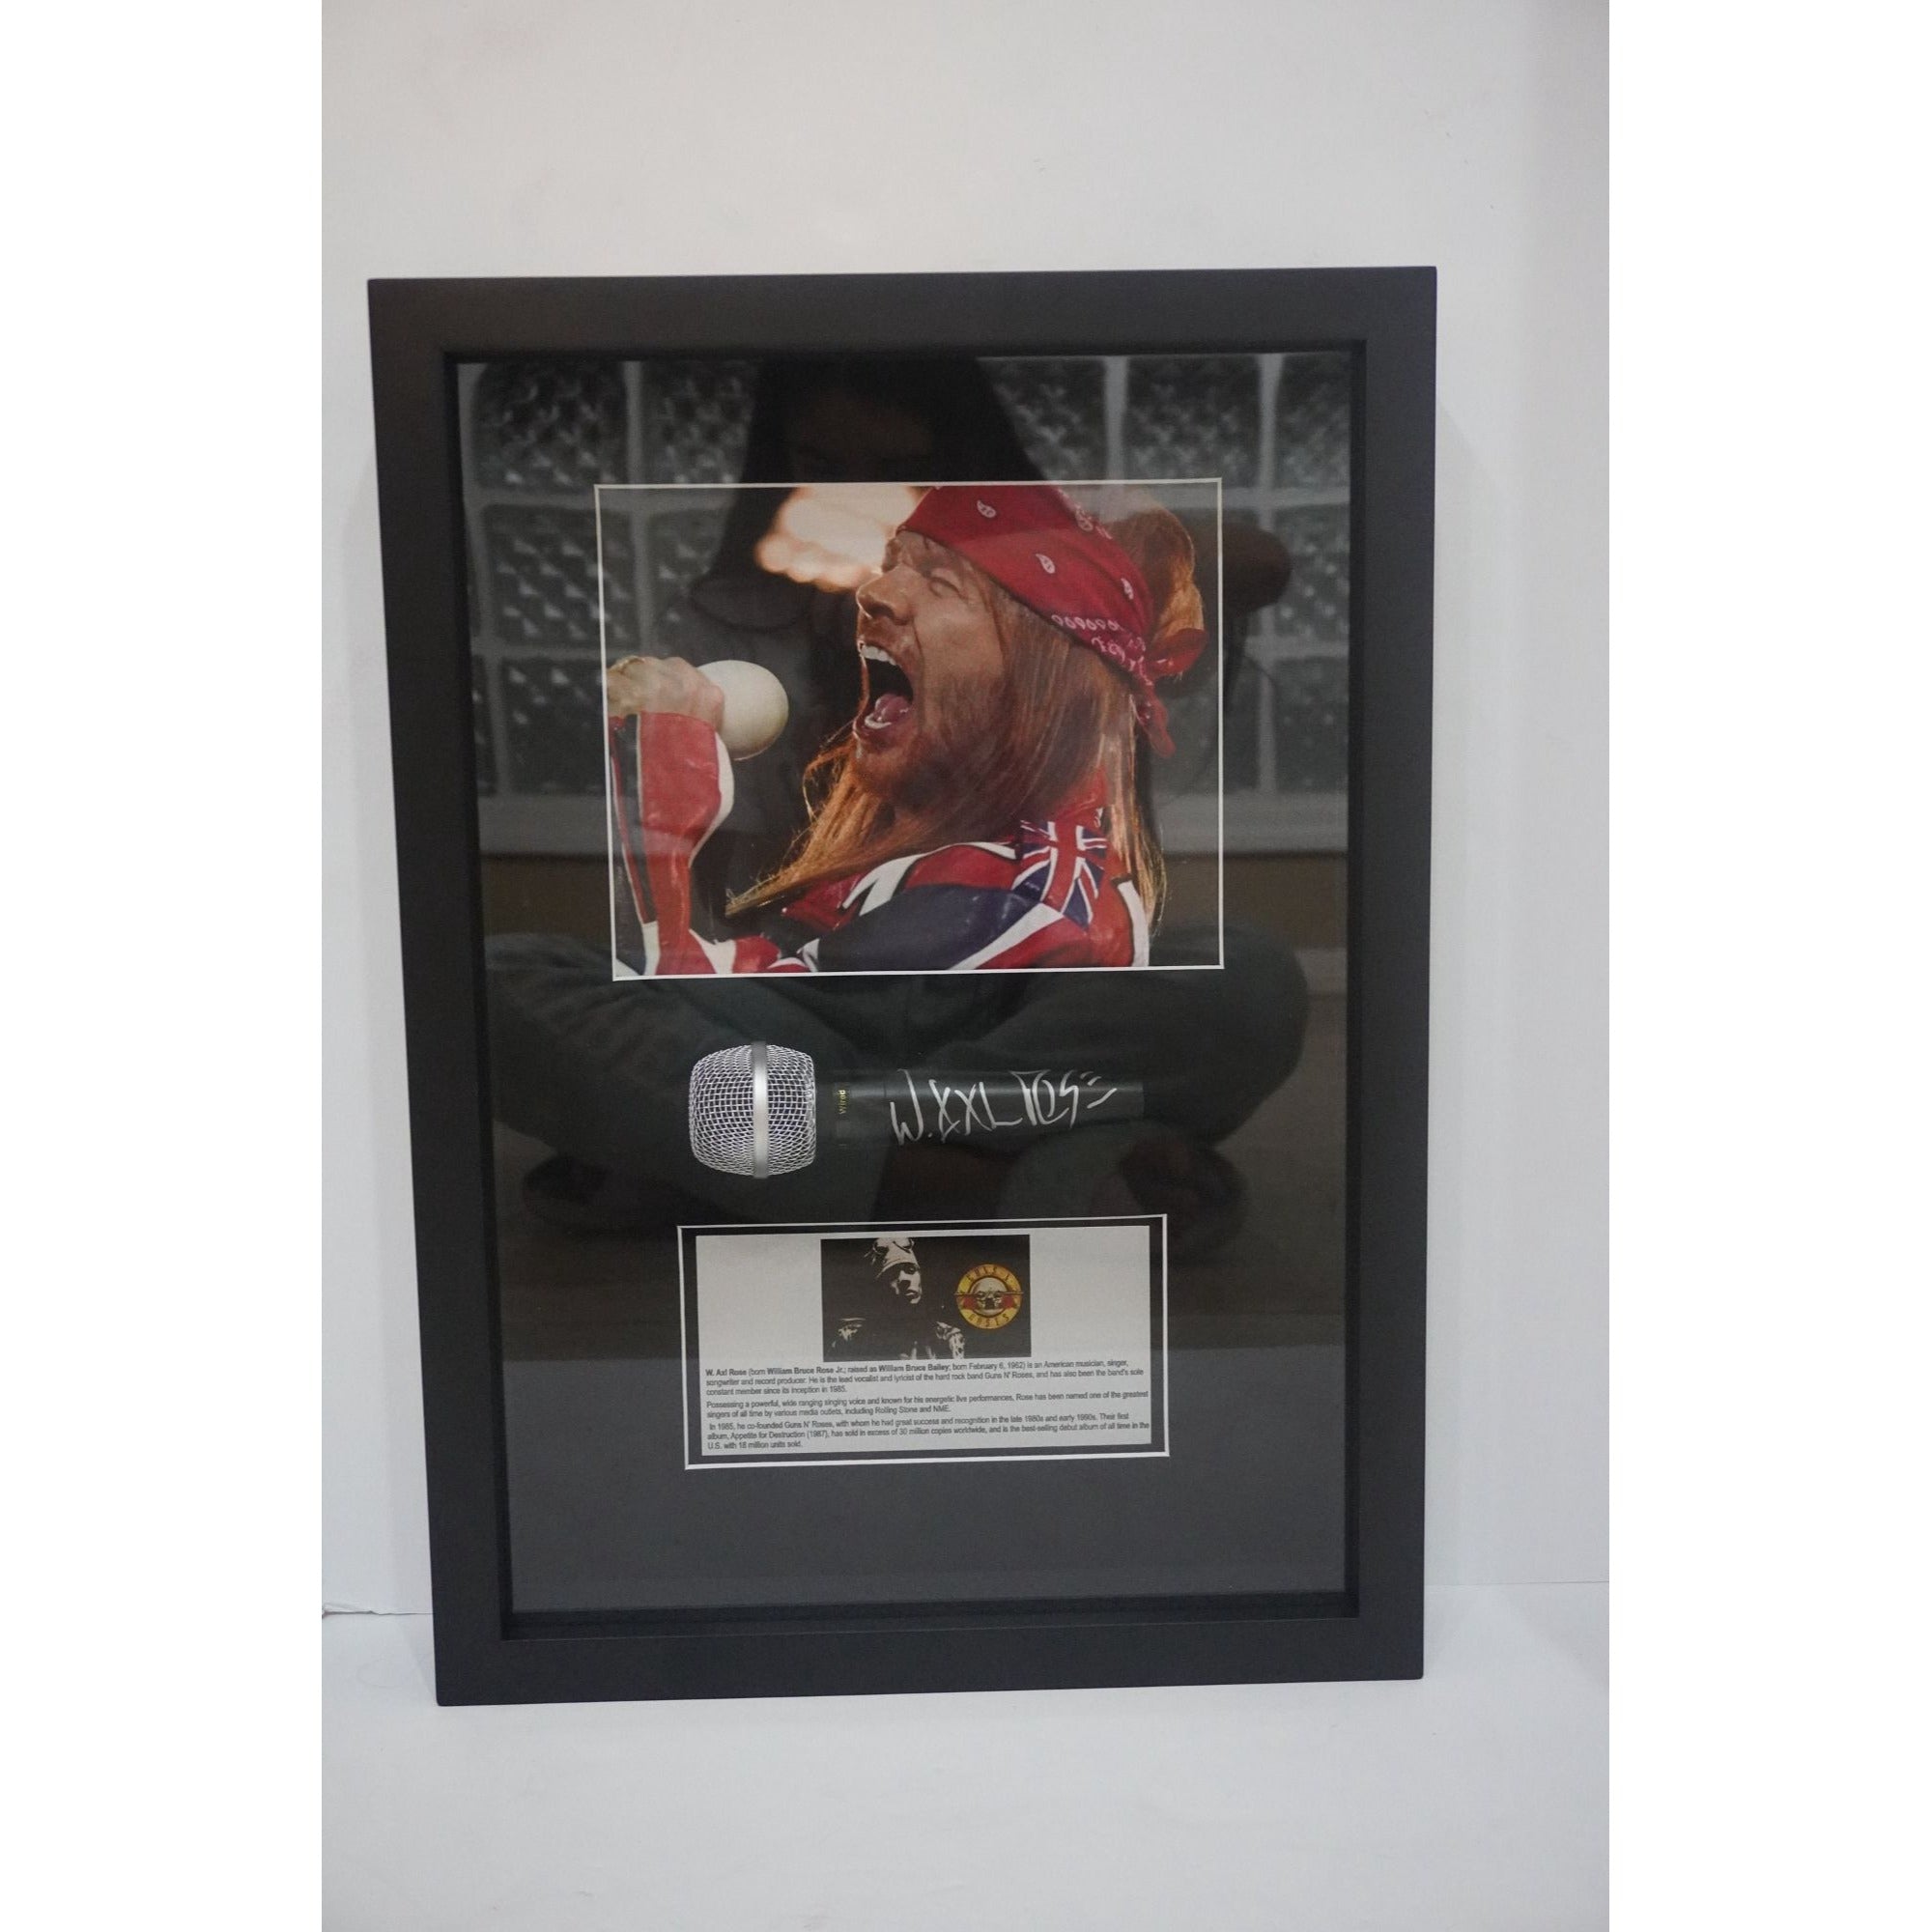 W. Axel Rose signed and framed microphone with proof